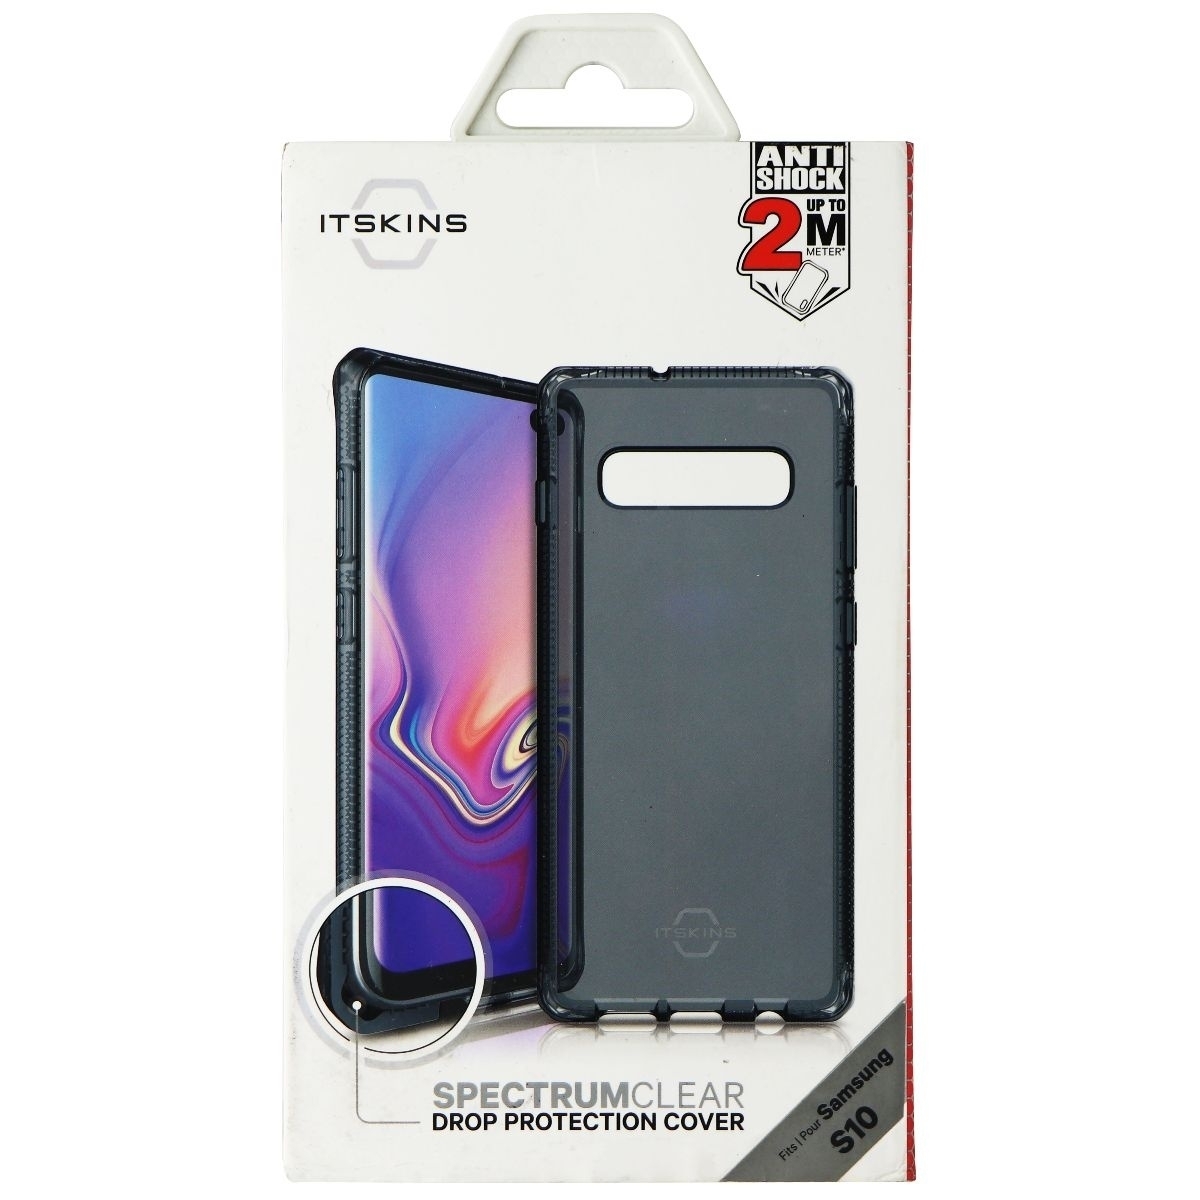 ITSKINS Spectrum Clear Protective Phone Case For Samsung Galaxy S10 - Black